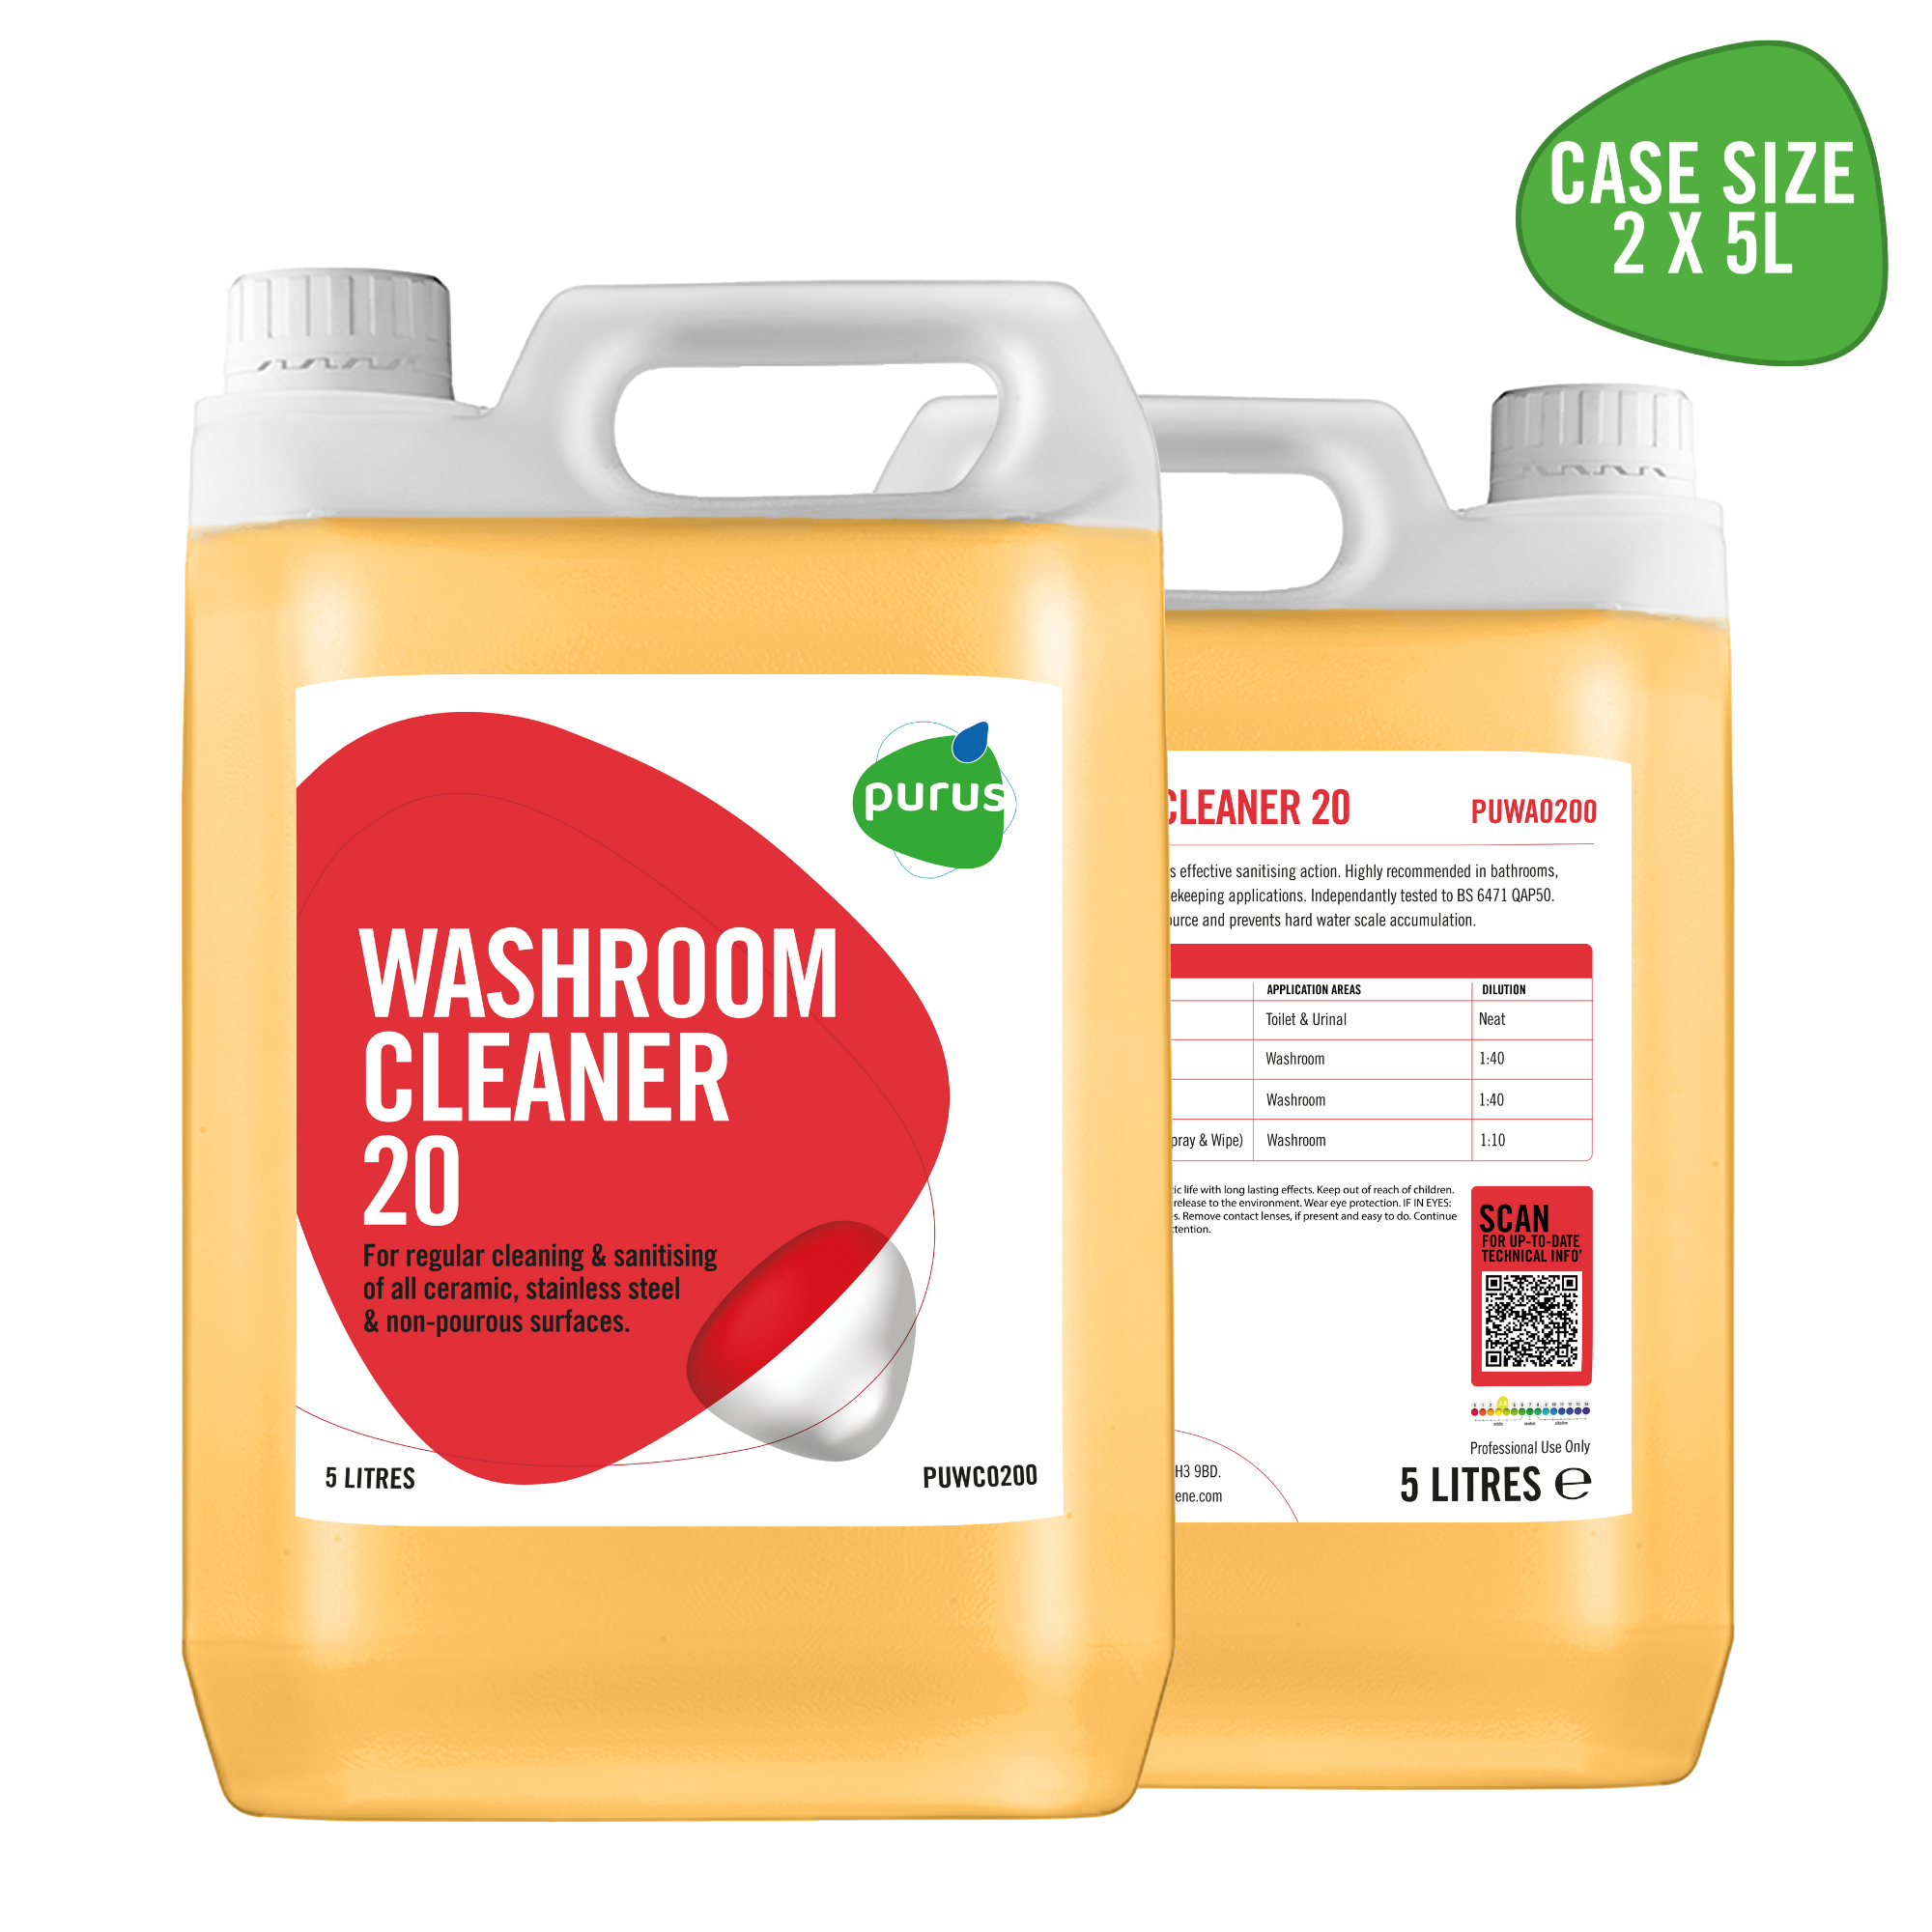 Purus Washroom Cleaner 20 | Perfumed All Round Cleaner & Disinfectant  - 2 x 5L